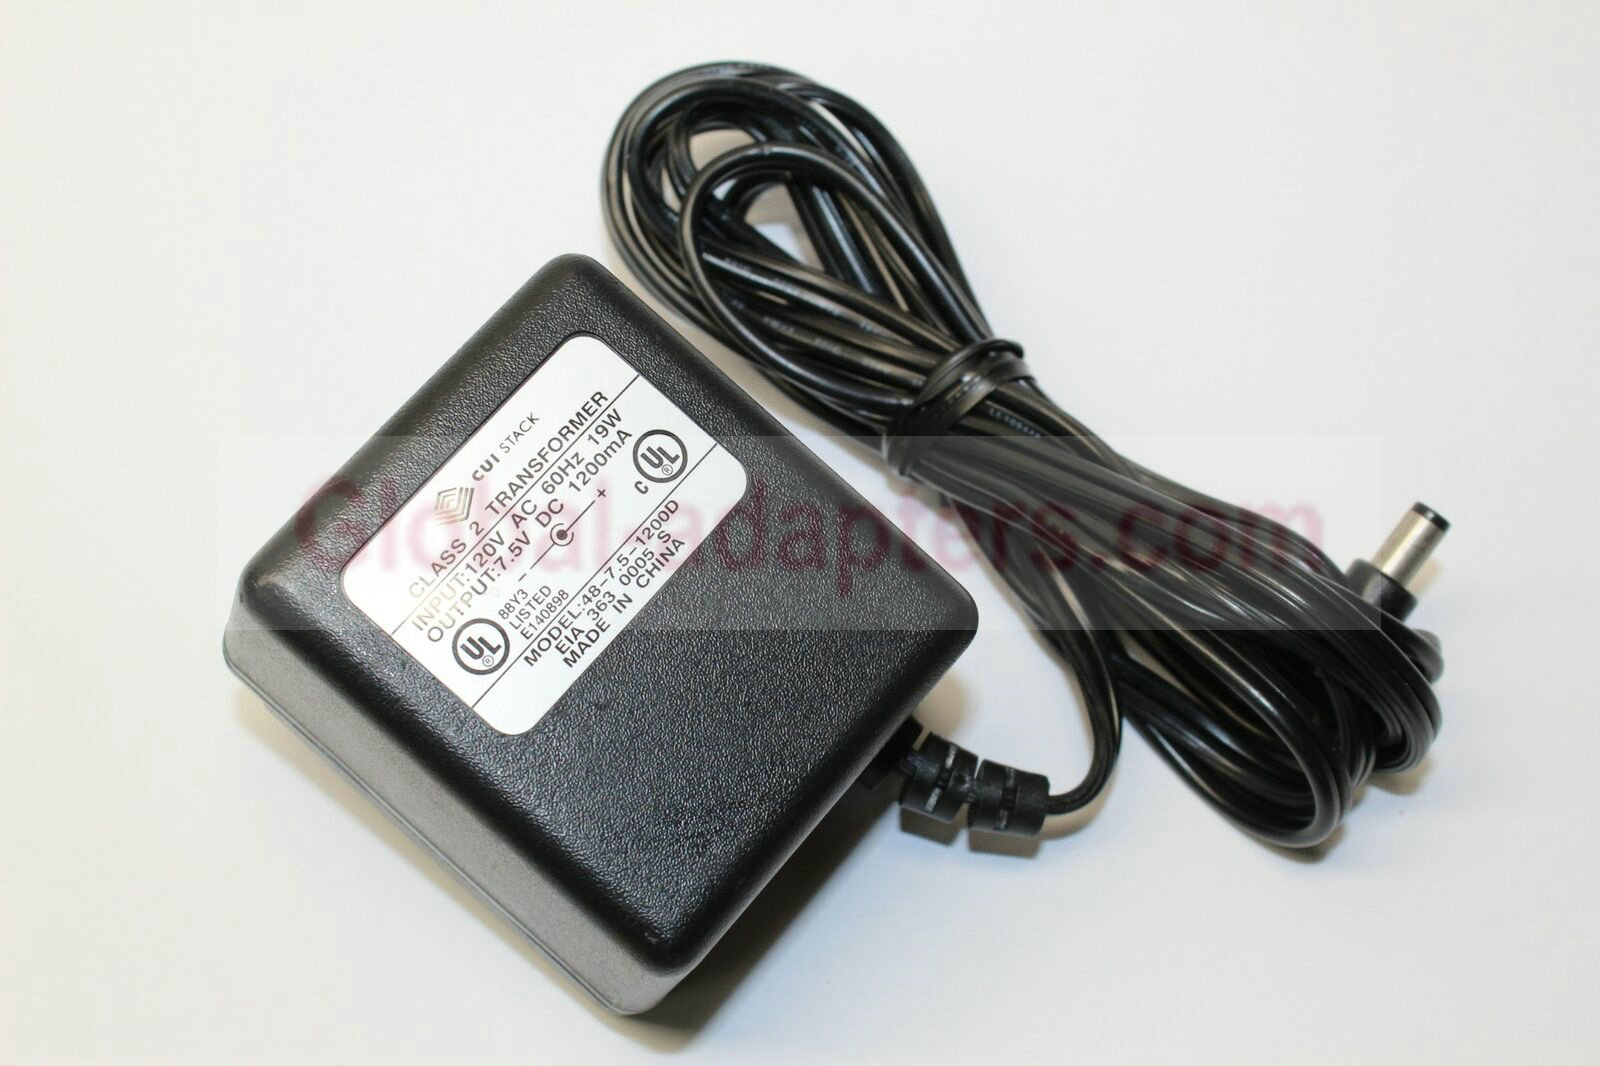 New 7.5V 1200mA Cui Stack 48-7.5-1200D Class 2 Transformer POWER SUPPLY AC ADAPTER